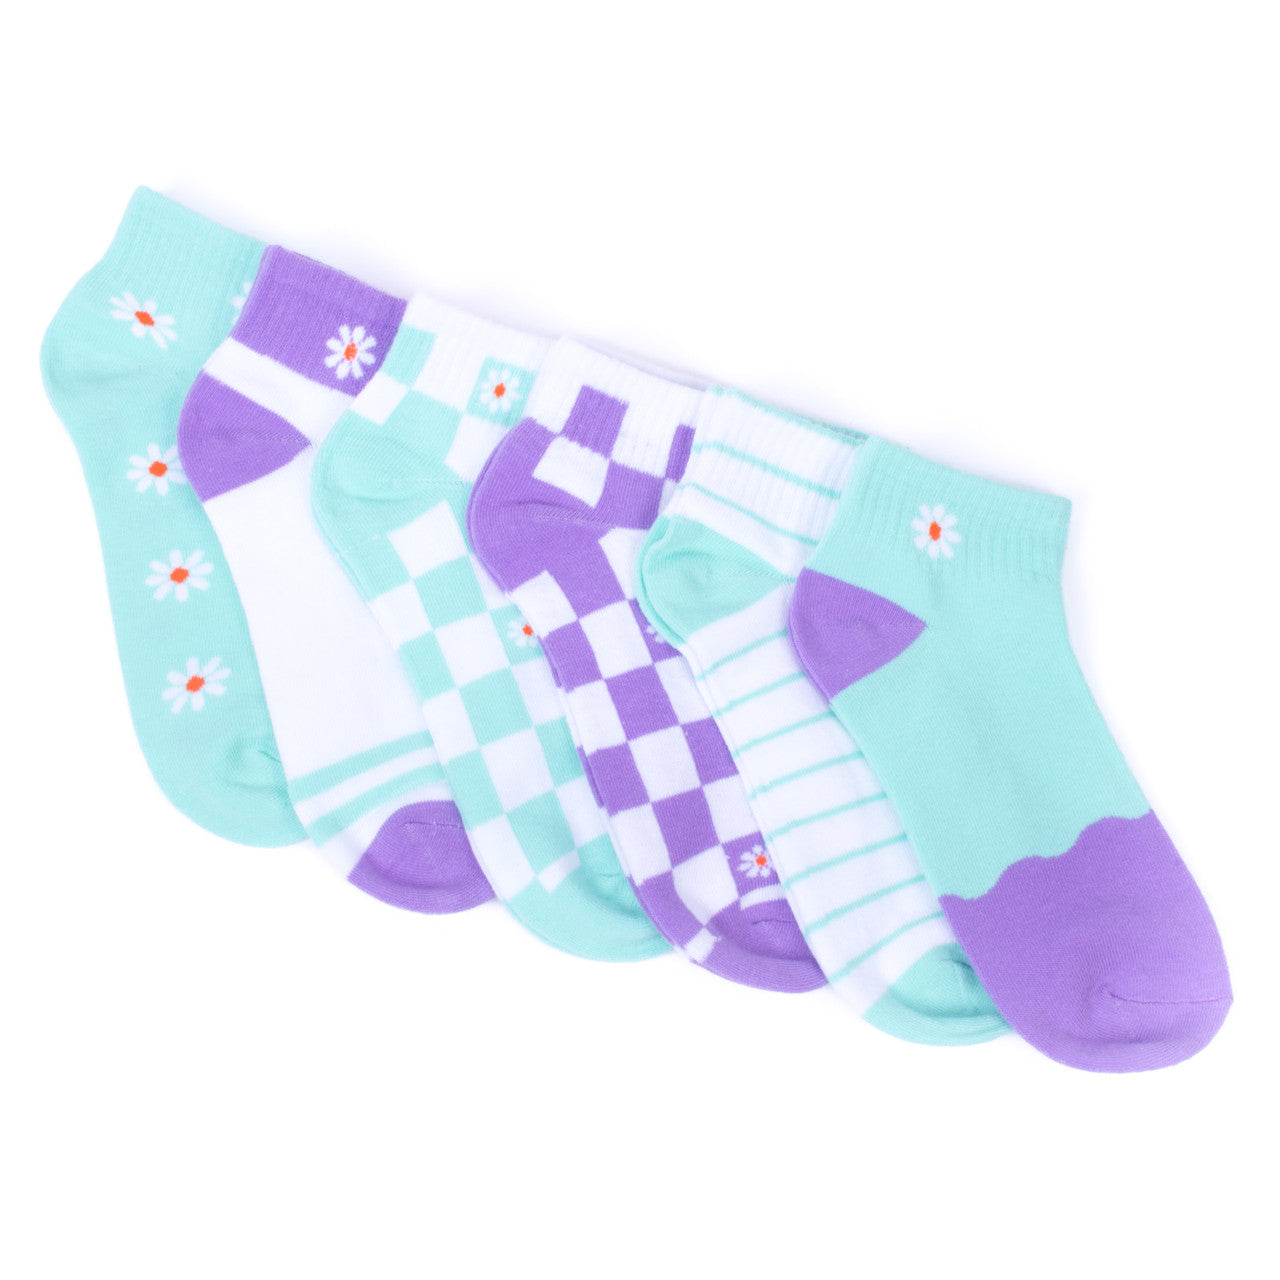 Women's Low Cut Socks Six Pairs Flower Embroidered Design Mom Gift Assorted Green Purple White Design 6 Pre Pack Ribbed Socks Ladies Socks